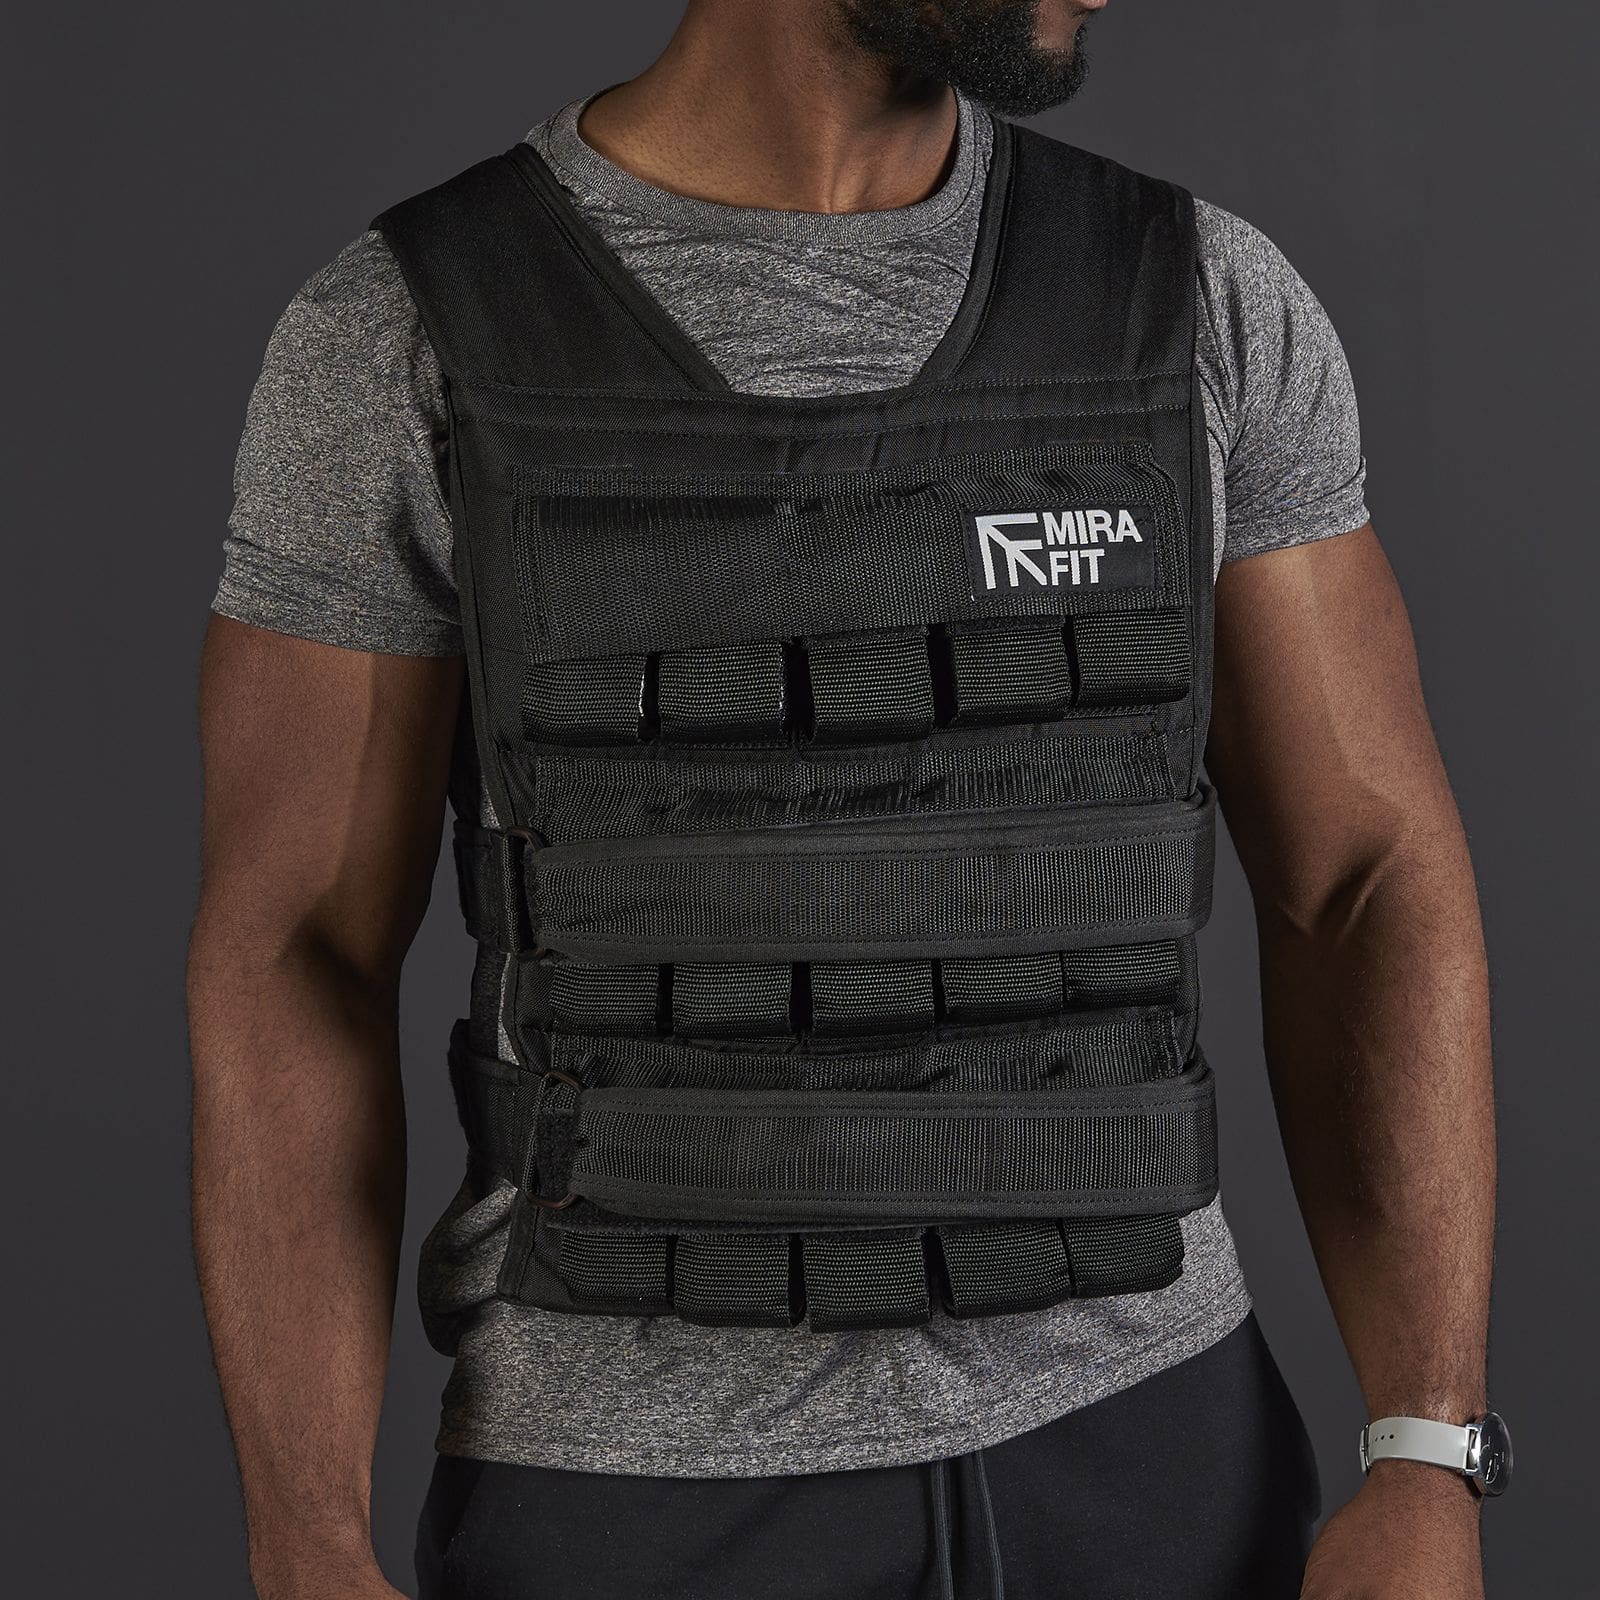 Mirafit Adjustable Weighted Vest Review UK